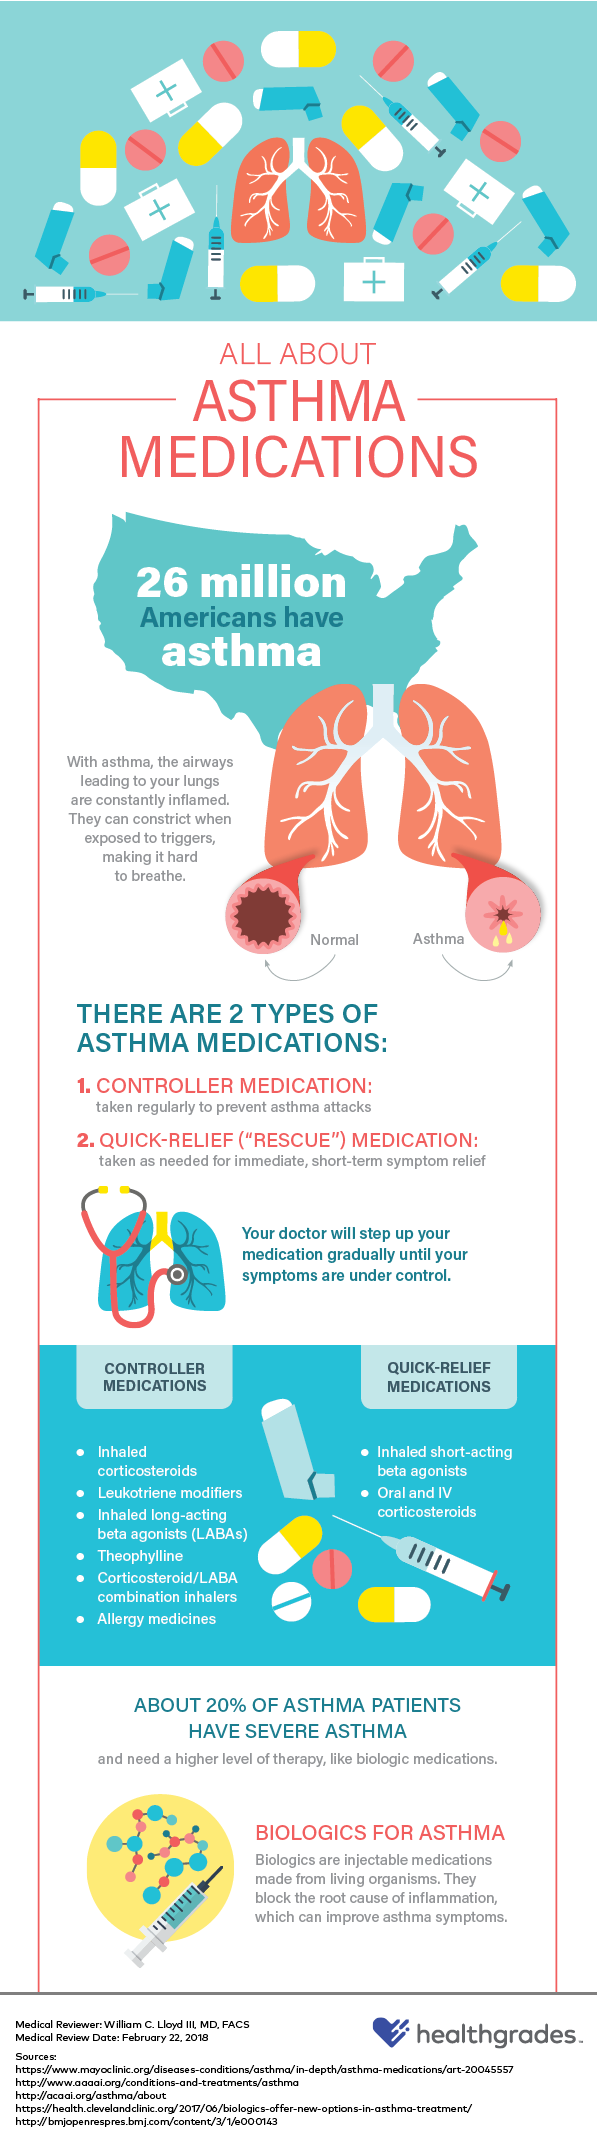 All About Asthma Medications infographic